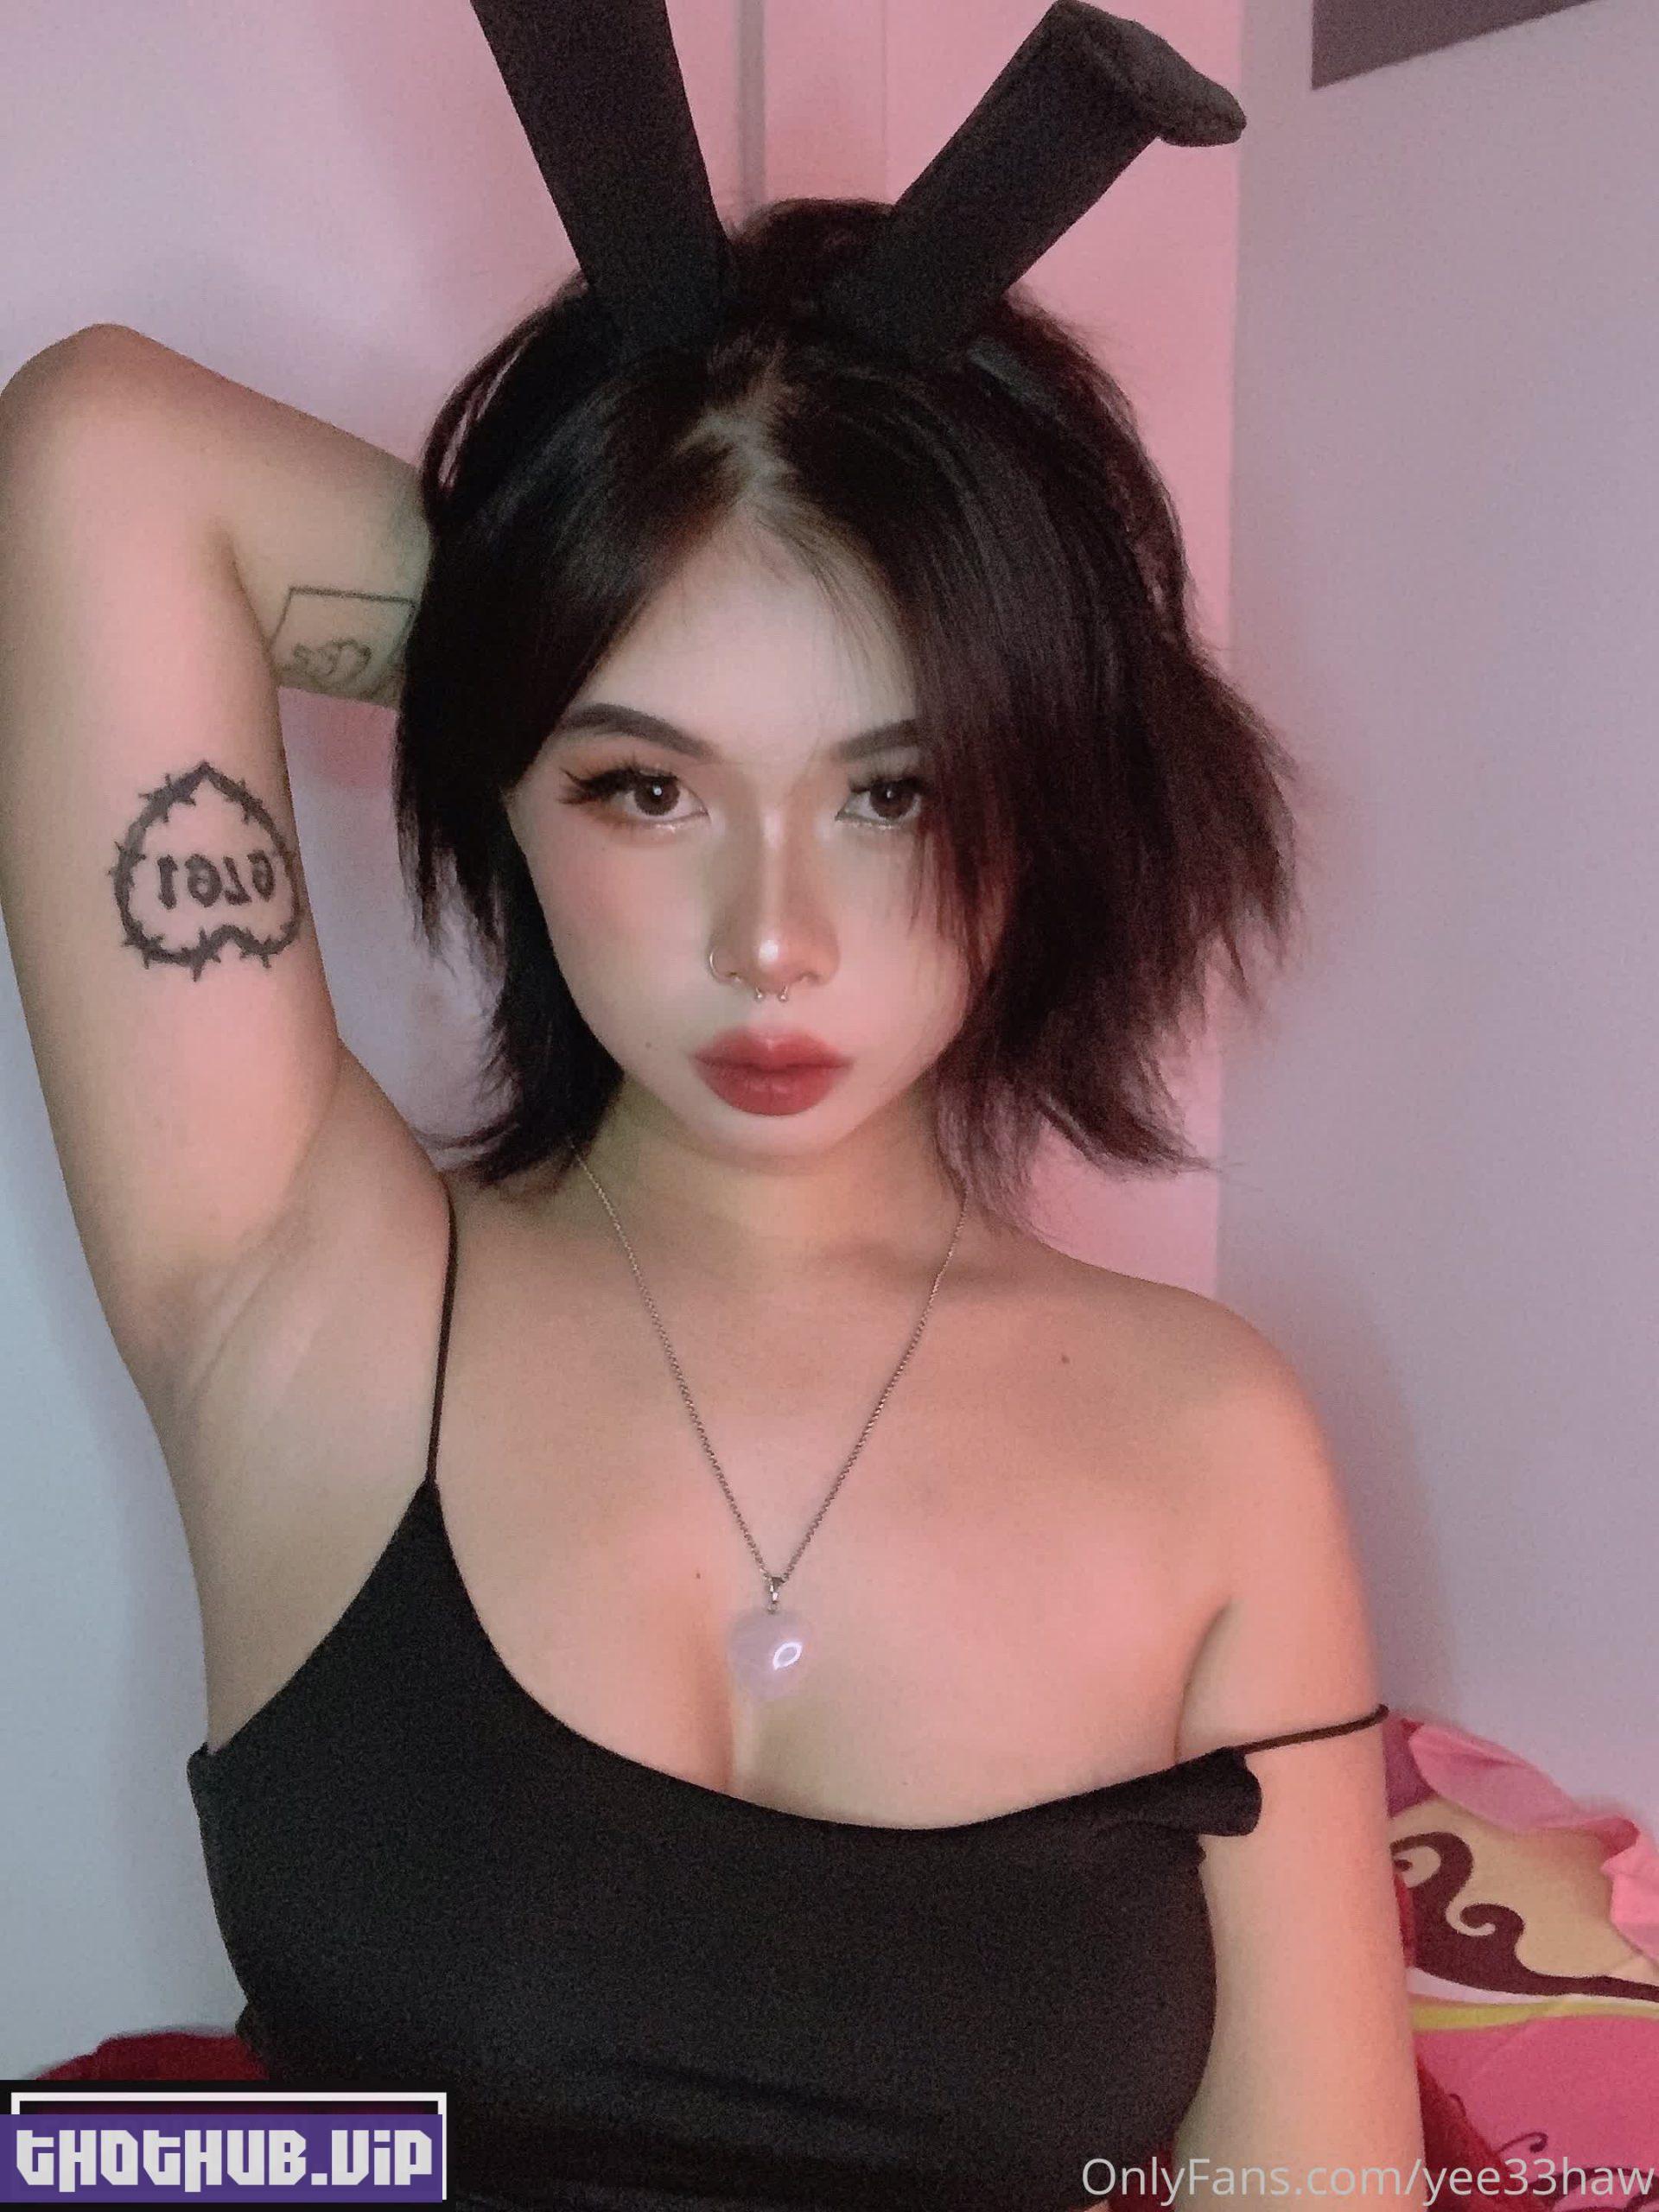 1693068977 617 Yee33haw %E2%80%93 Busty Asian Onlyfans Nudes